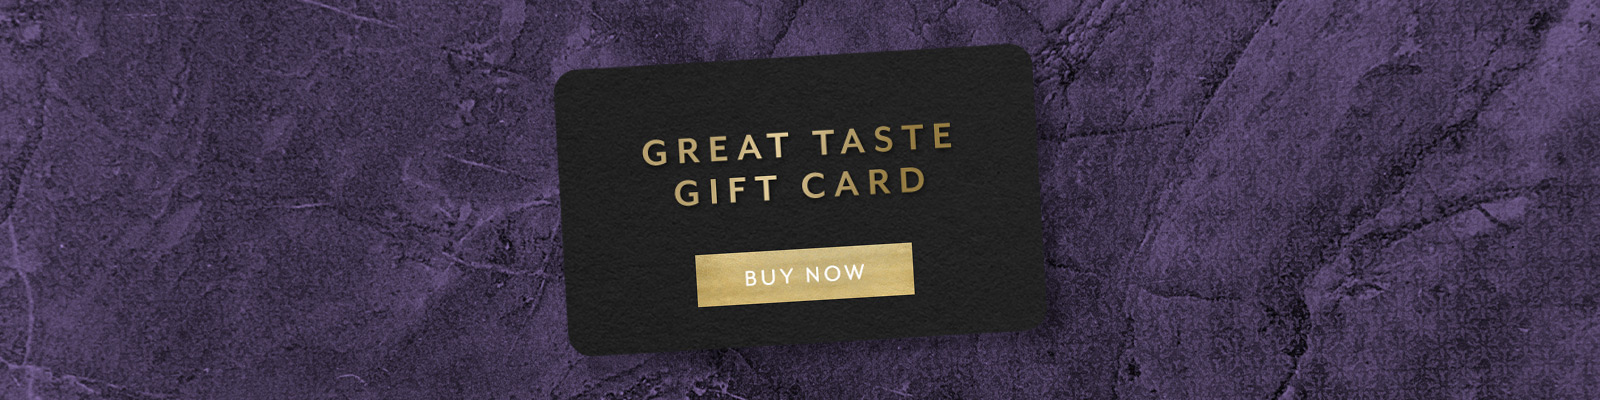 The Wavendon Arms Gift Card